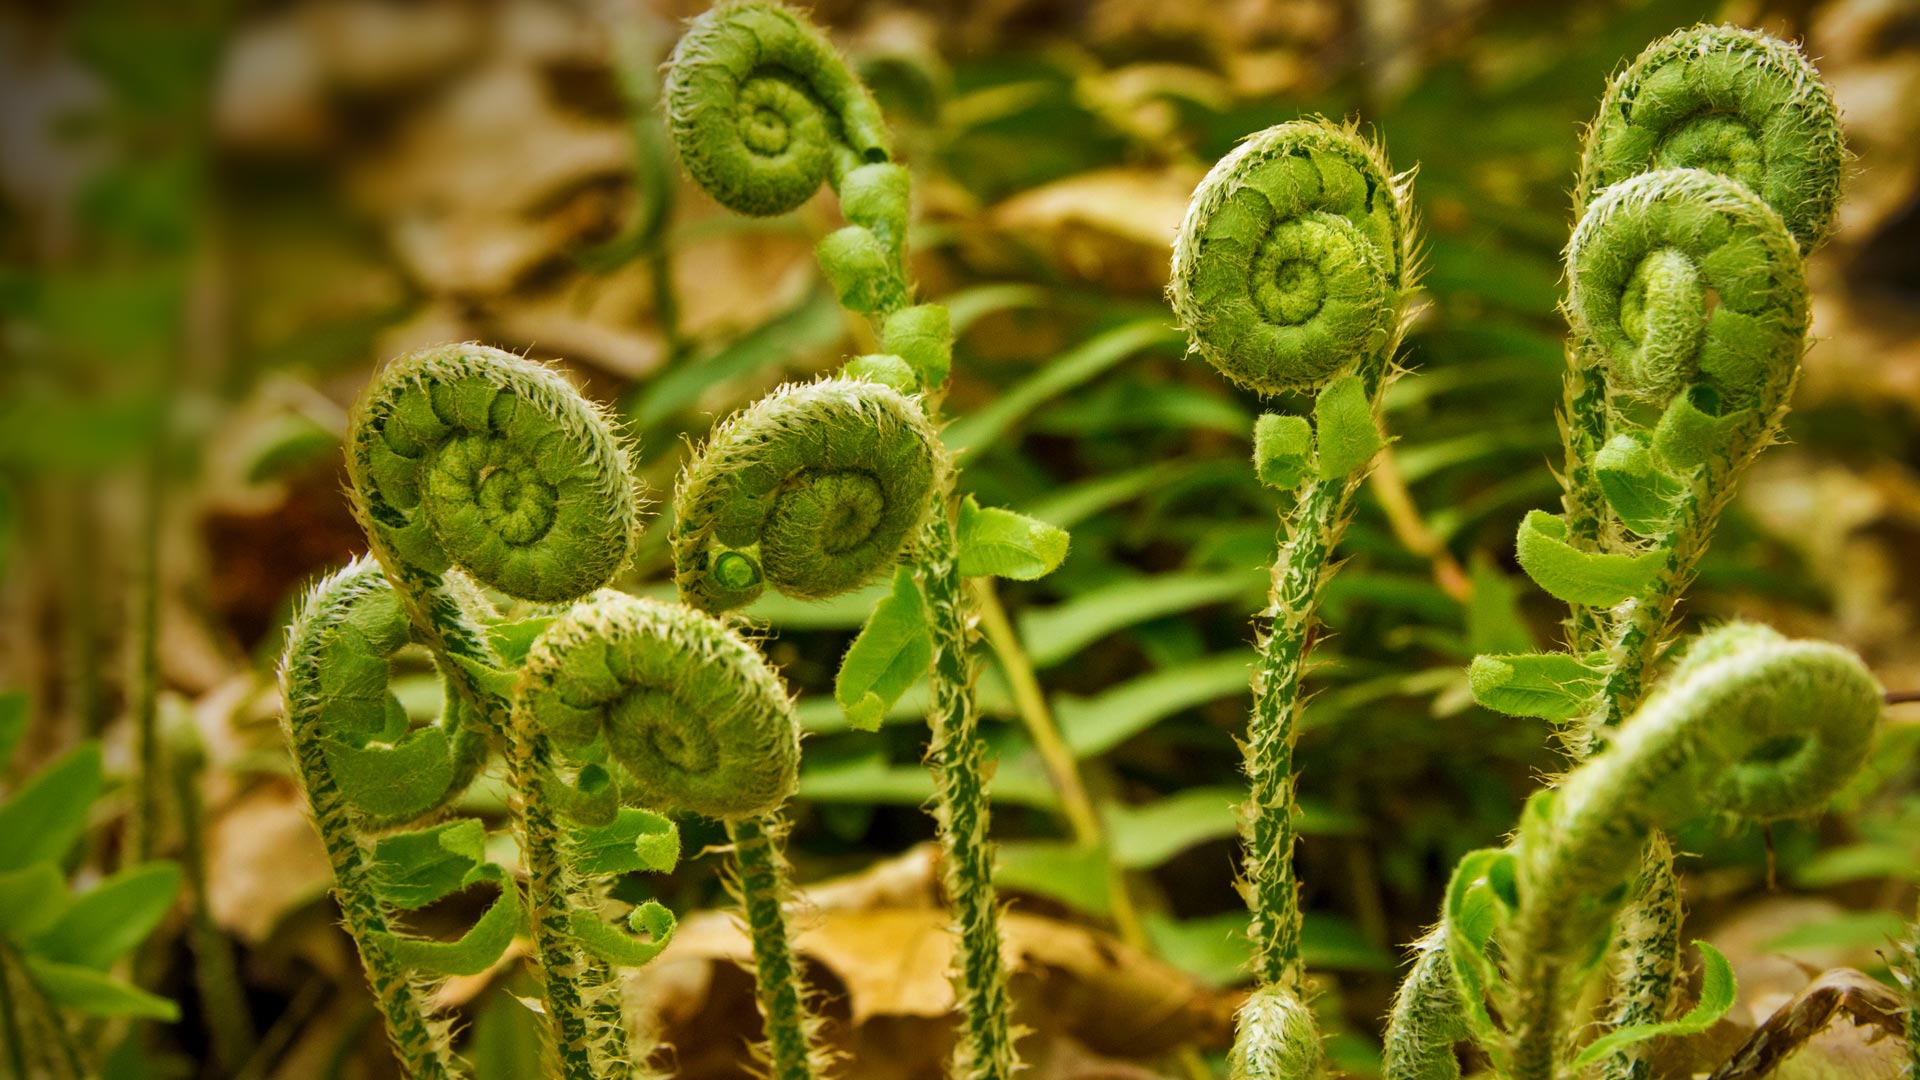 20170526 Fern fiddleheads at Valley Falls Park in Vernon, Connecticut 1920x1080.jpg